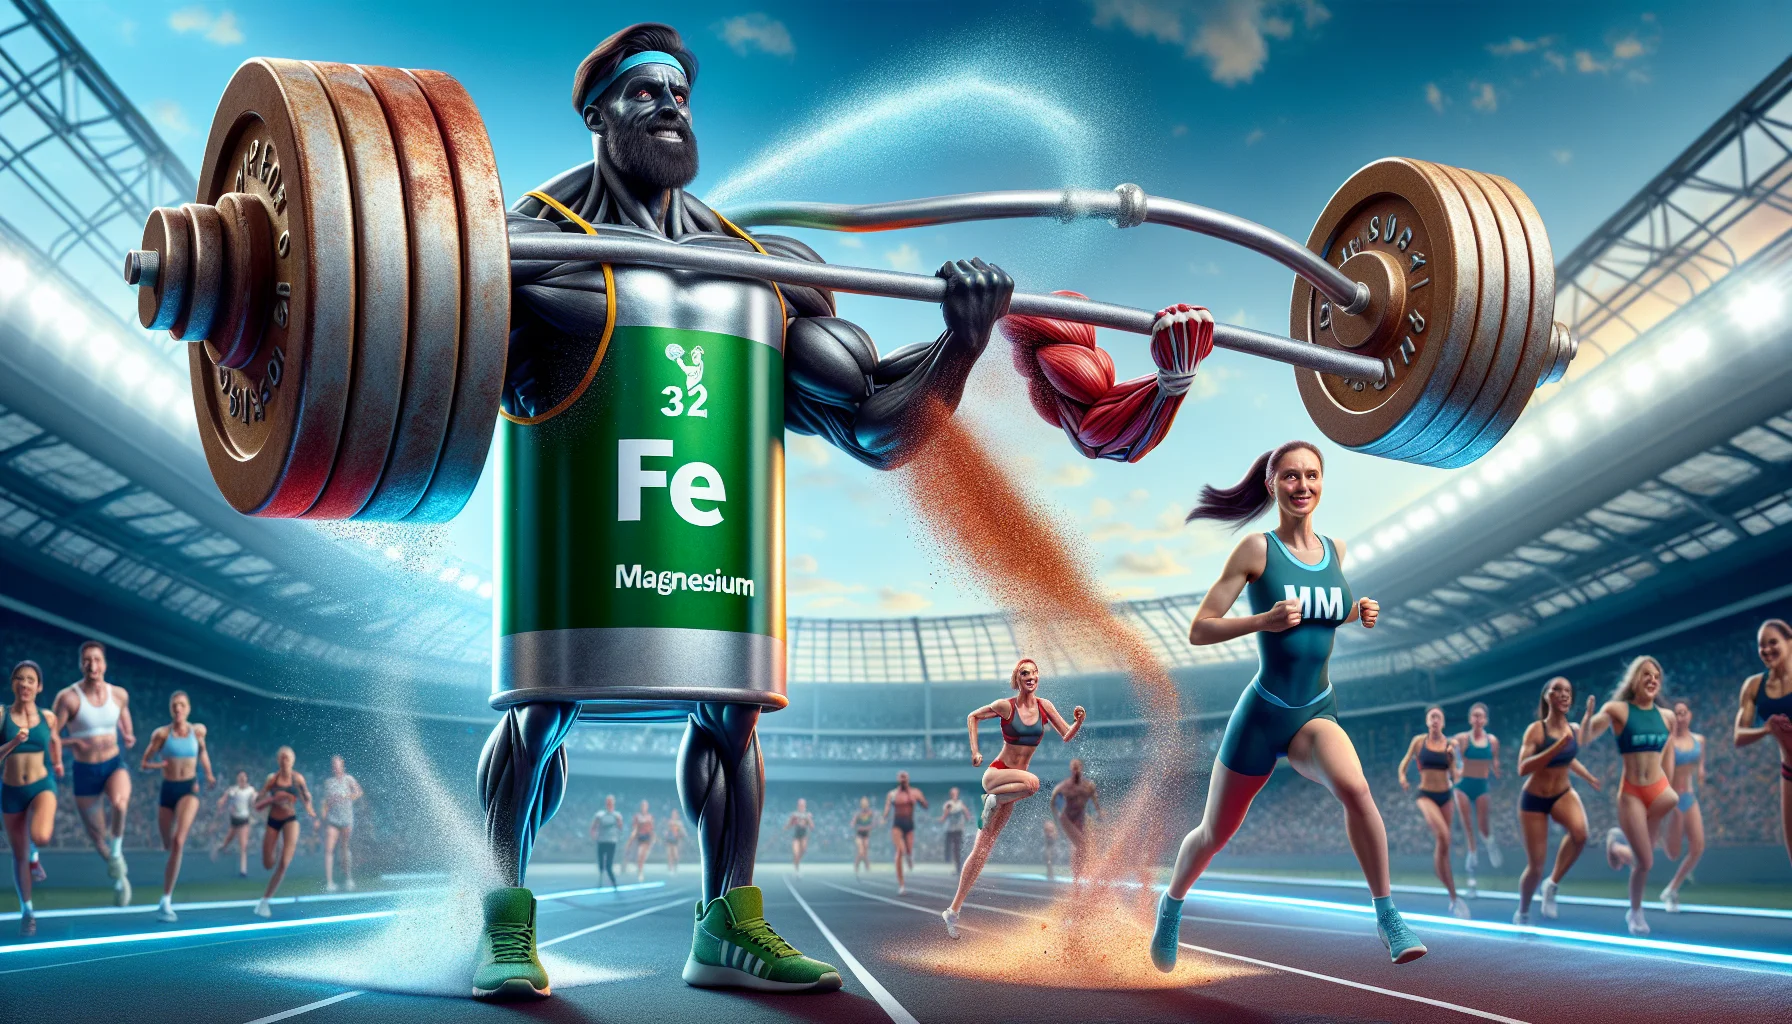 Generate an amusing, realistic image that showcases the combination of iron and magnesium supplements in a sports-related context. Specifically, envision two anthropomorphized characters, one embodying Iron and the other Magnesium. Iron, a Black muscular male, is lifting a gigantic barbell with ease, while Magnesium, a Caucasian agile female, is easily outpacing runners on a track. Both are wearing sports gear and their respective symbols 'Fe' for Iron and 'Mg' for Magnesium are emblazoned on their outfits. The vibrant atmosphere clearly communicates the benefit of these supplements for athletic performance.